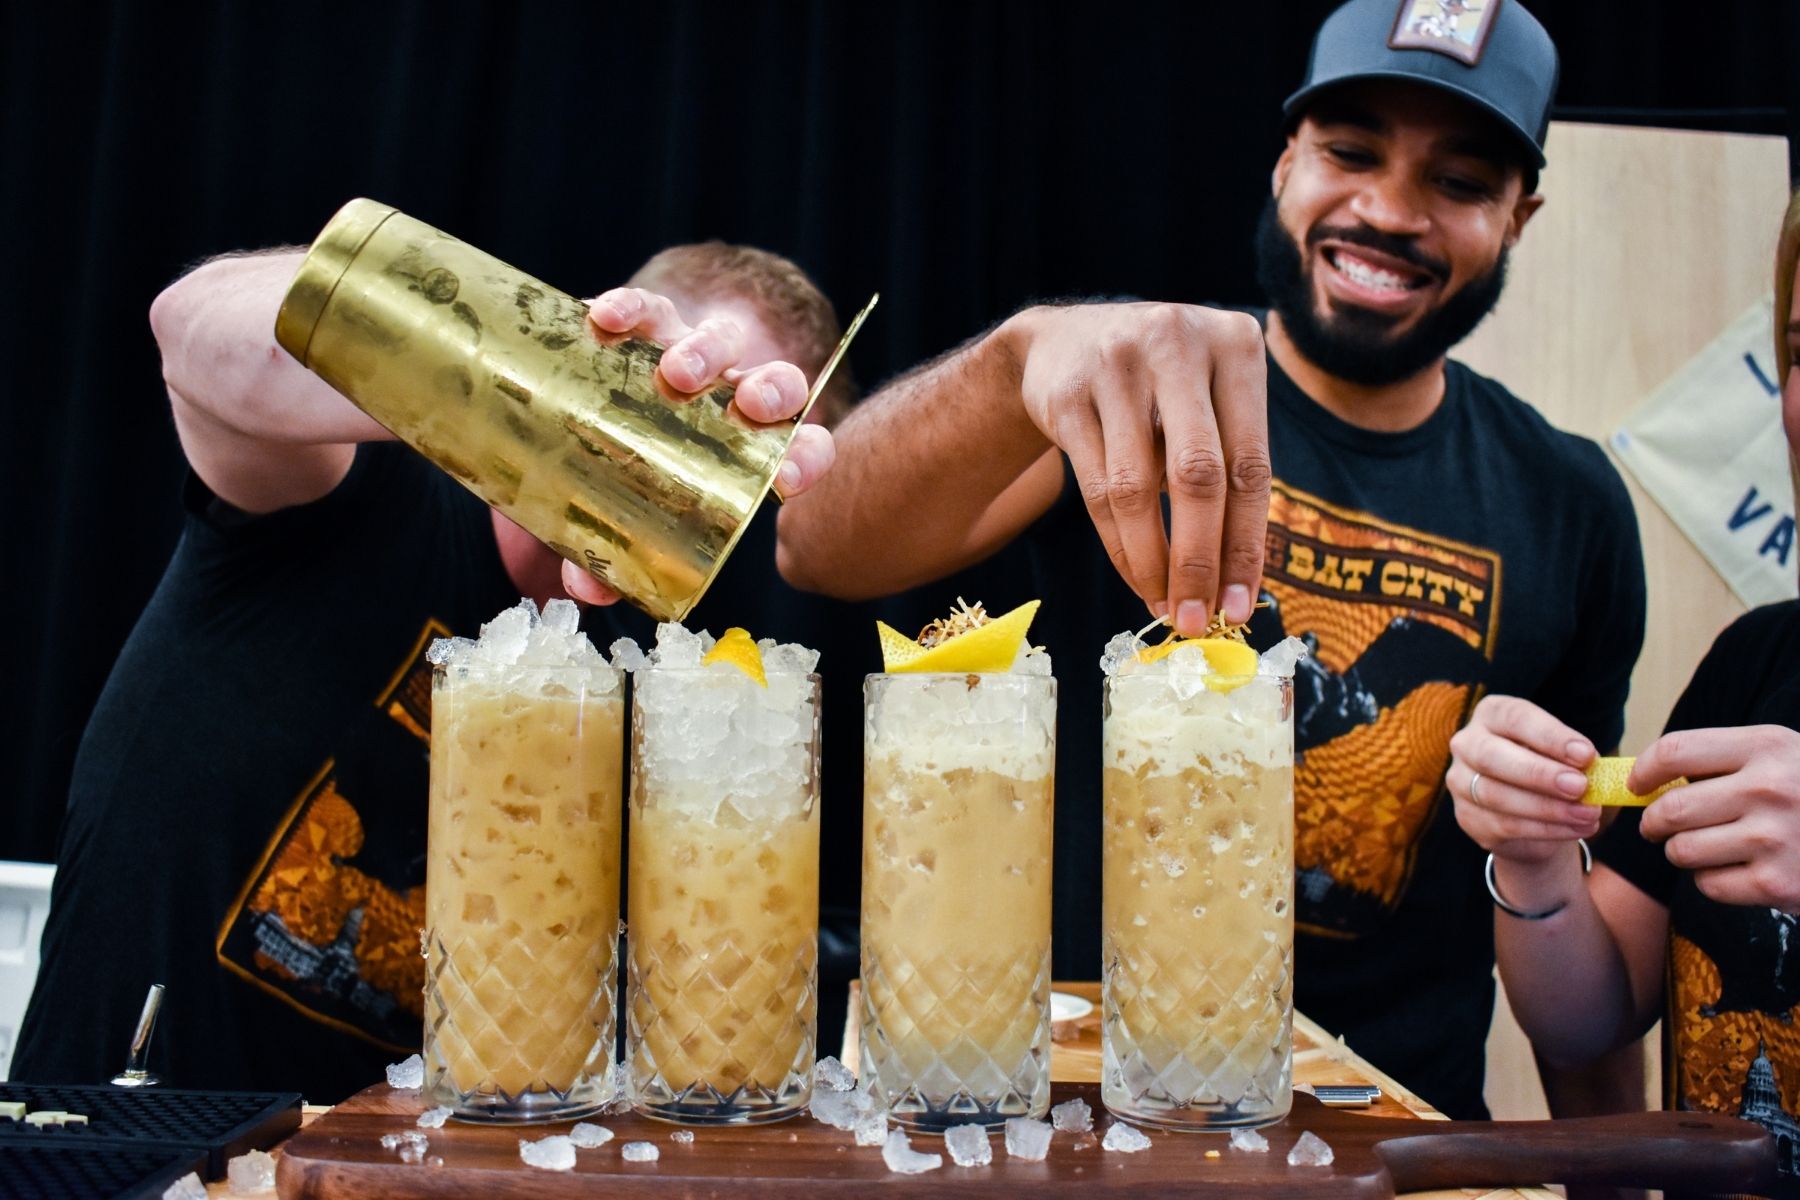 Bartenders making what appears to be a tiki-style cocktail for an Austin Food & Wine Alliance food festival.